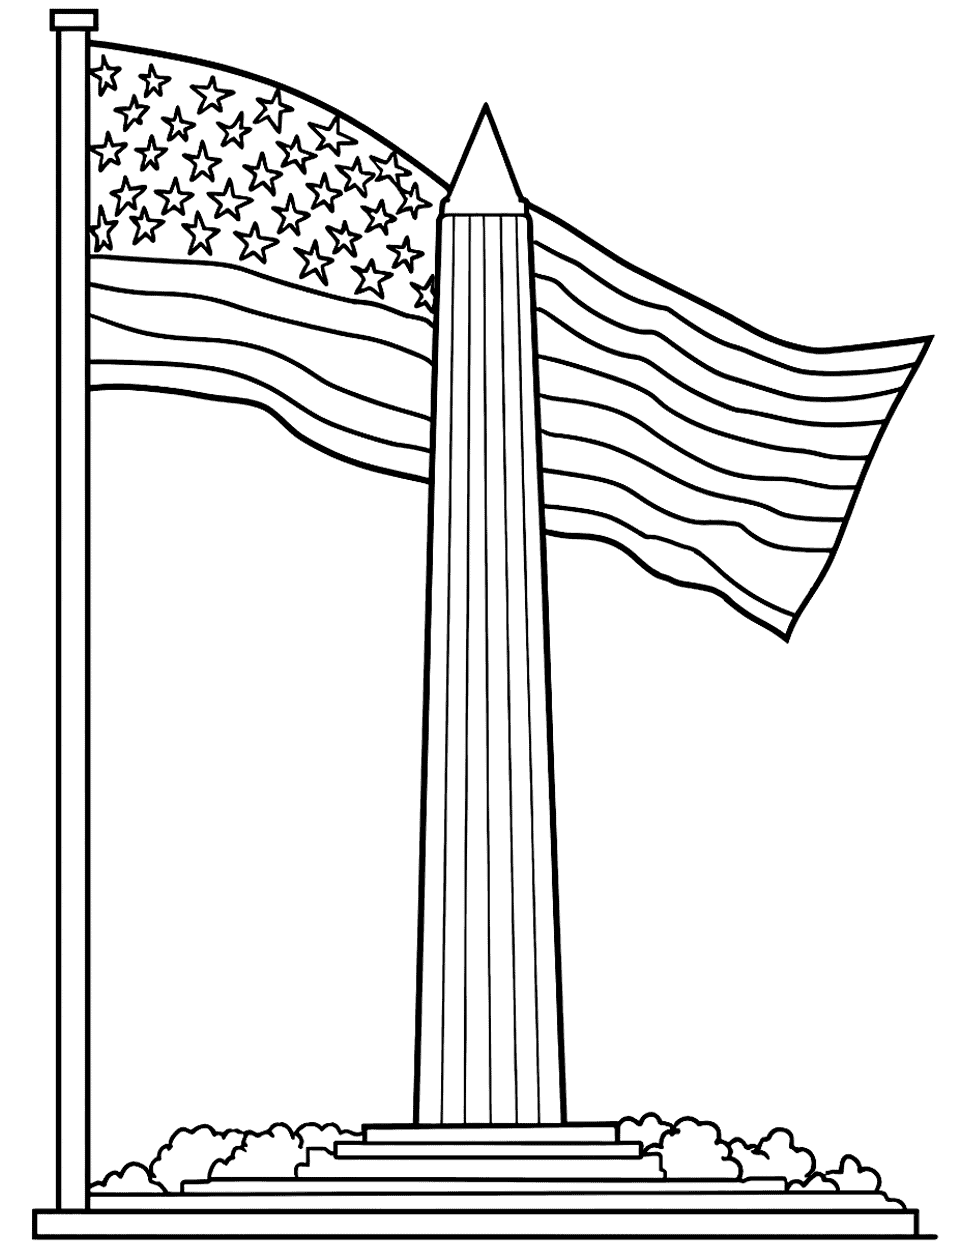 Washington Monument and Flag American Coloring Page - The Washington Monument with a American flag behind it.